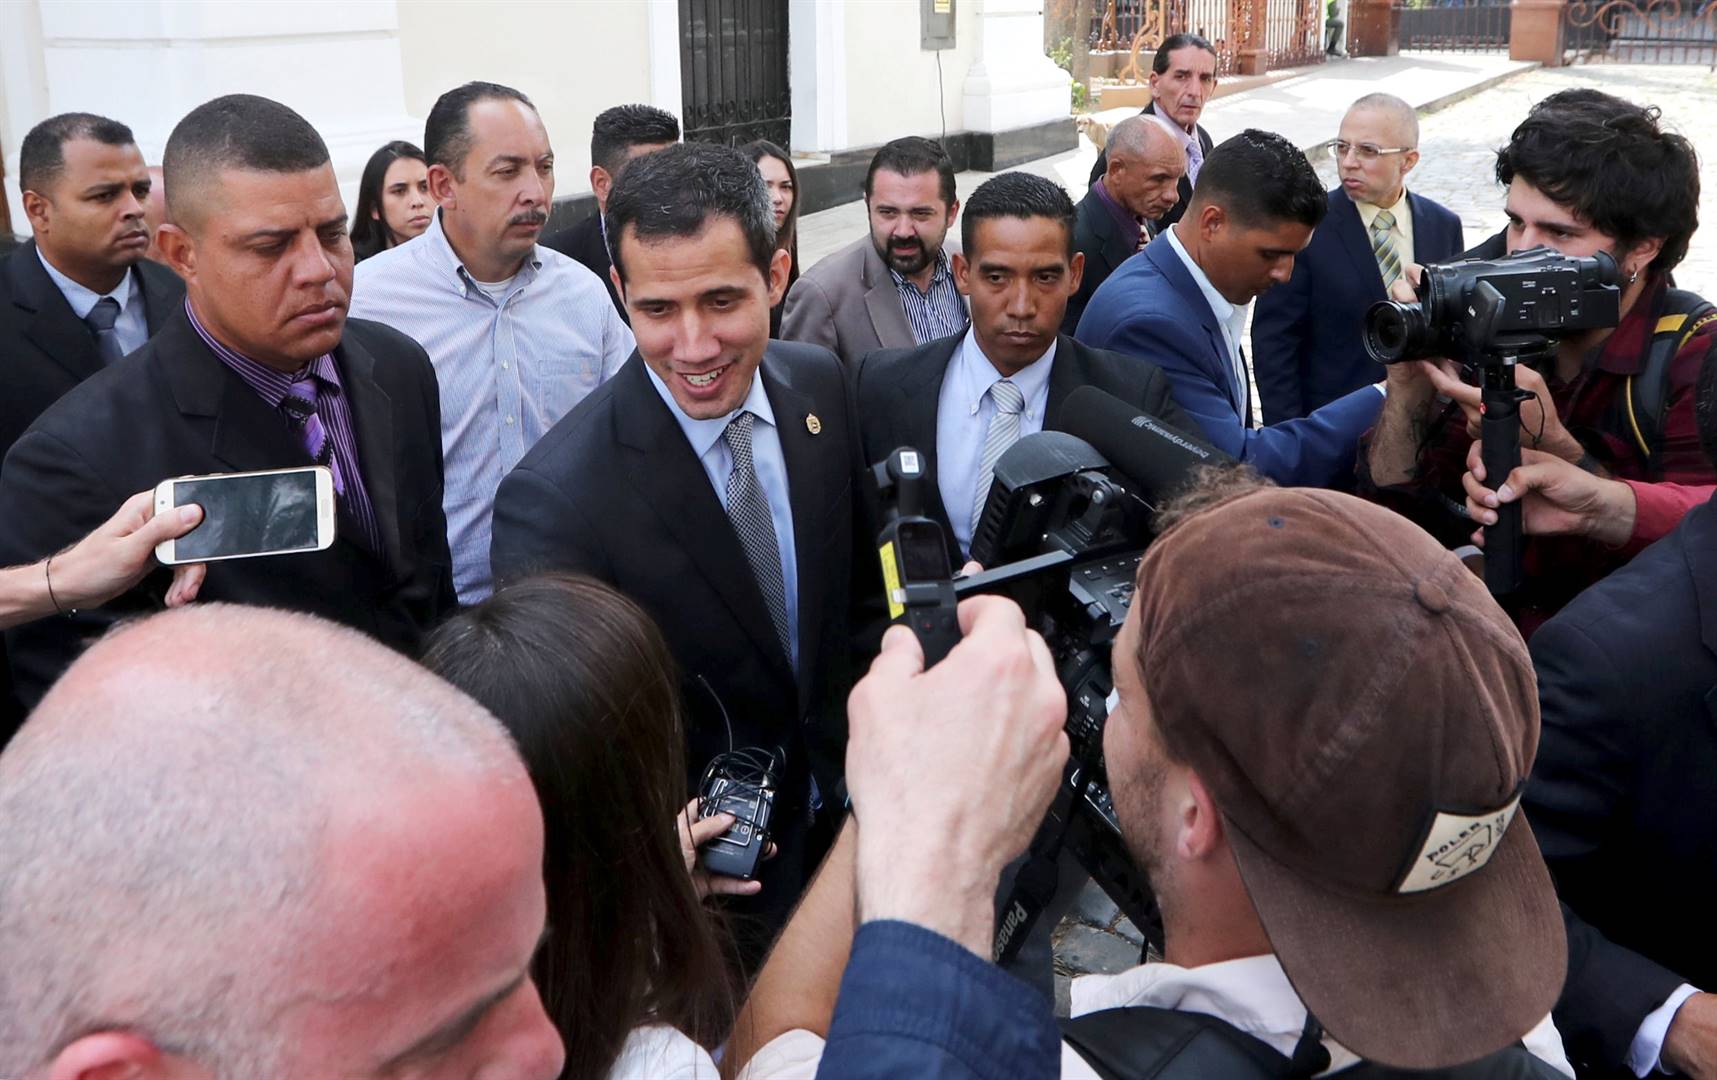 Venezuelan opposition leader Juan Guaido, who many nations have recognised as the country&#39;s rightful interim ruler, talks to the media after a session of Venezuela&#39;s National Assembly in Caracas, Venezuela, on Wednesday (March 6 2019). Picture: Ivan Alvarado/Reuters